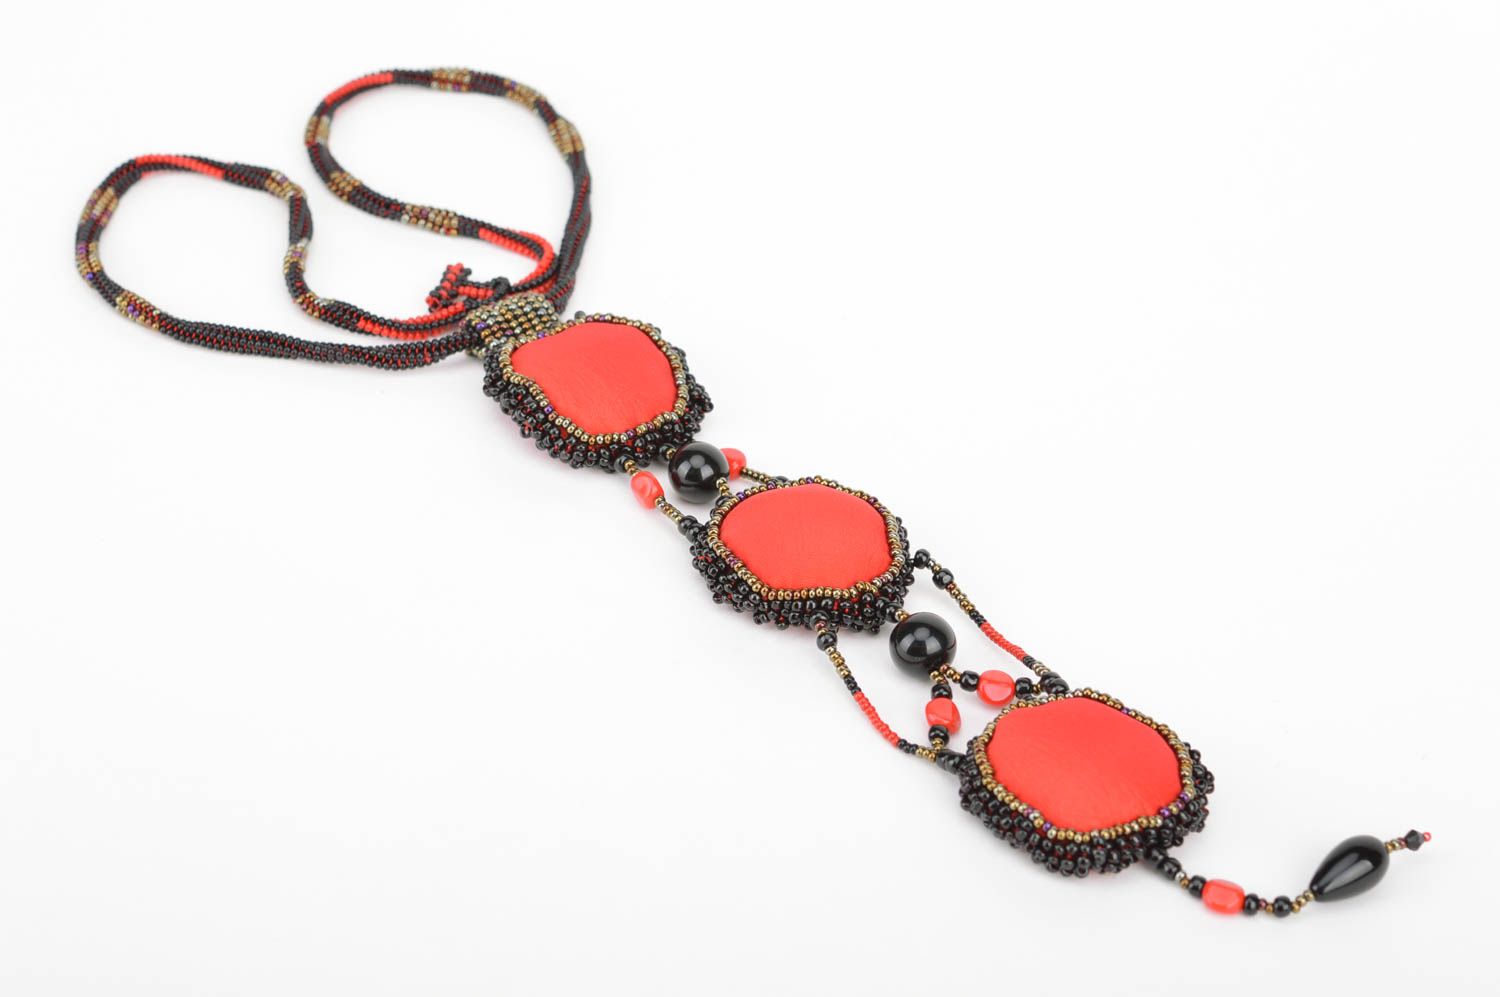 Beaded cord necklace with pendants on fabric basis sewn over with beads photo 3